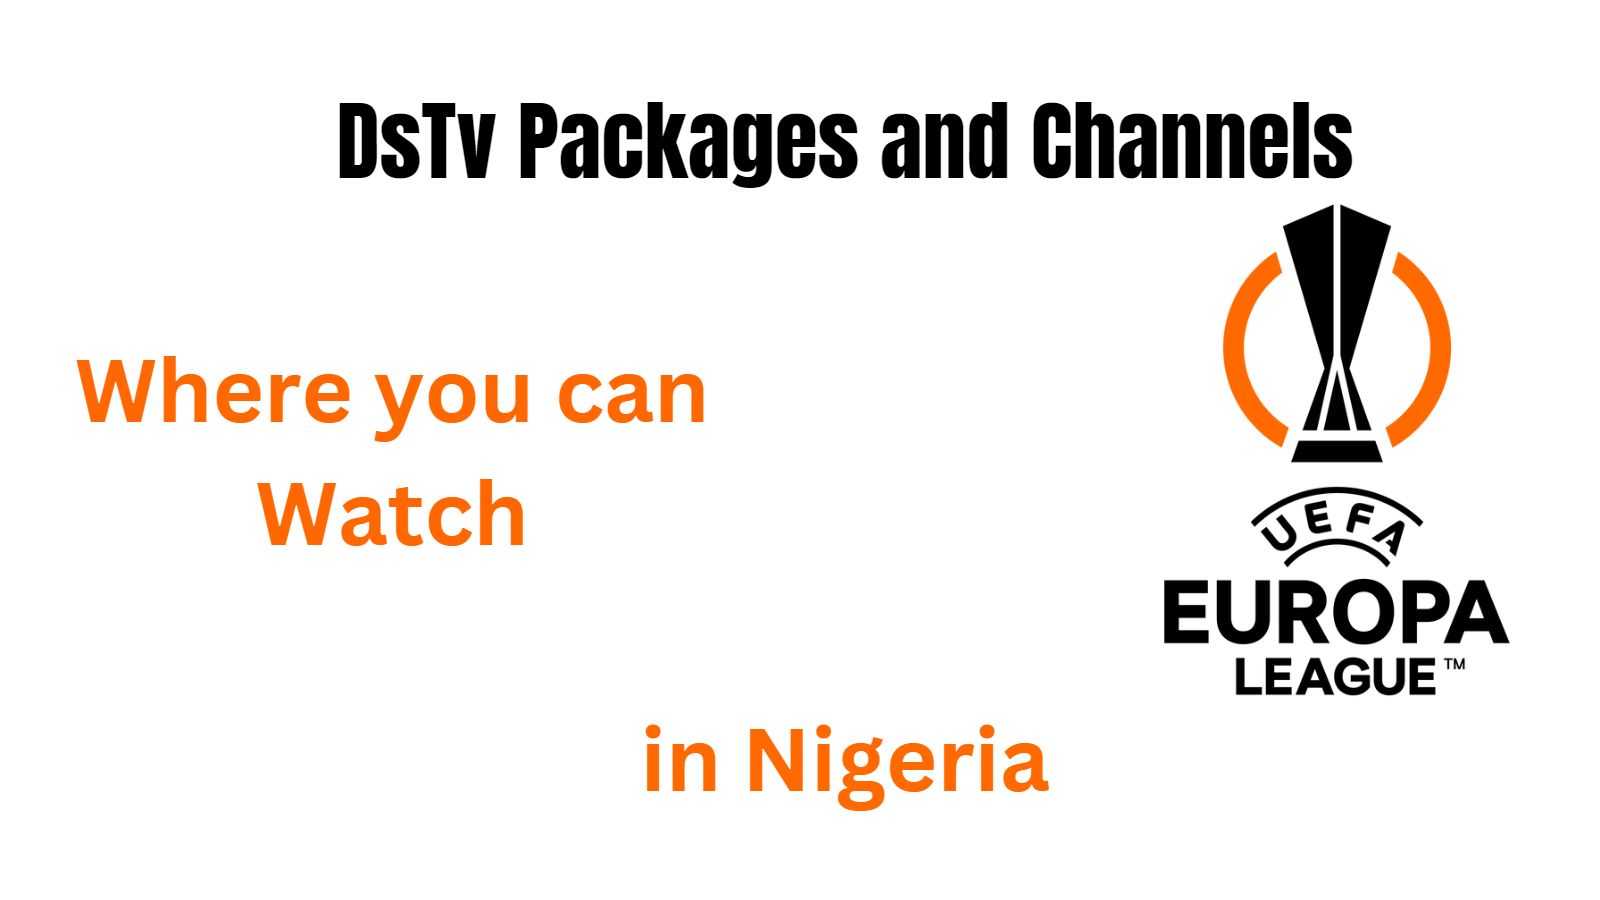 DsTv Packages and Channels showing Europa League in Nigeria